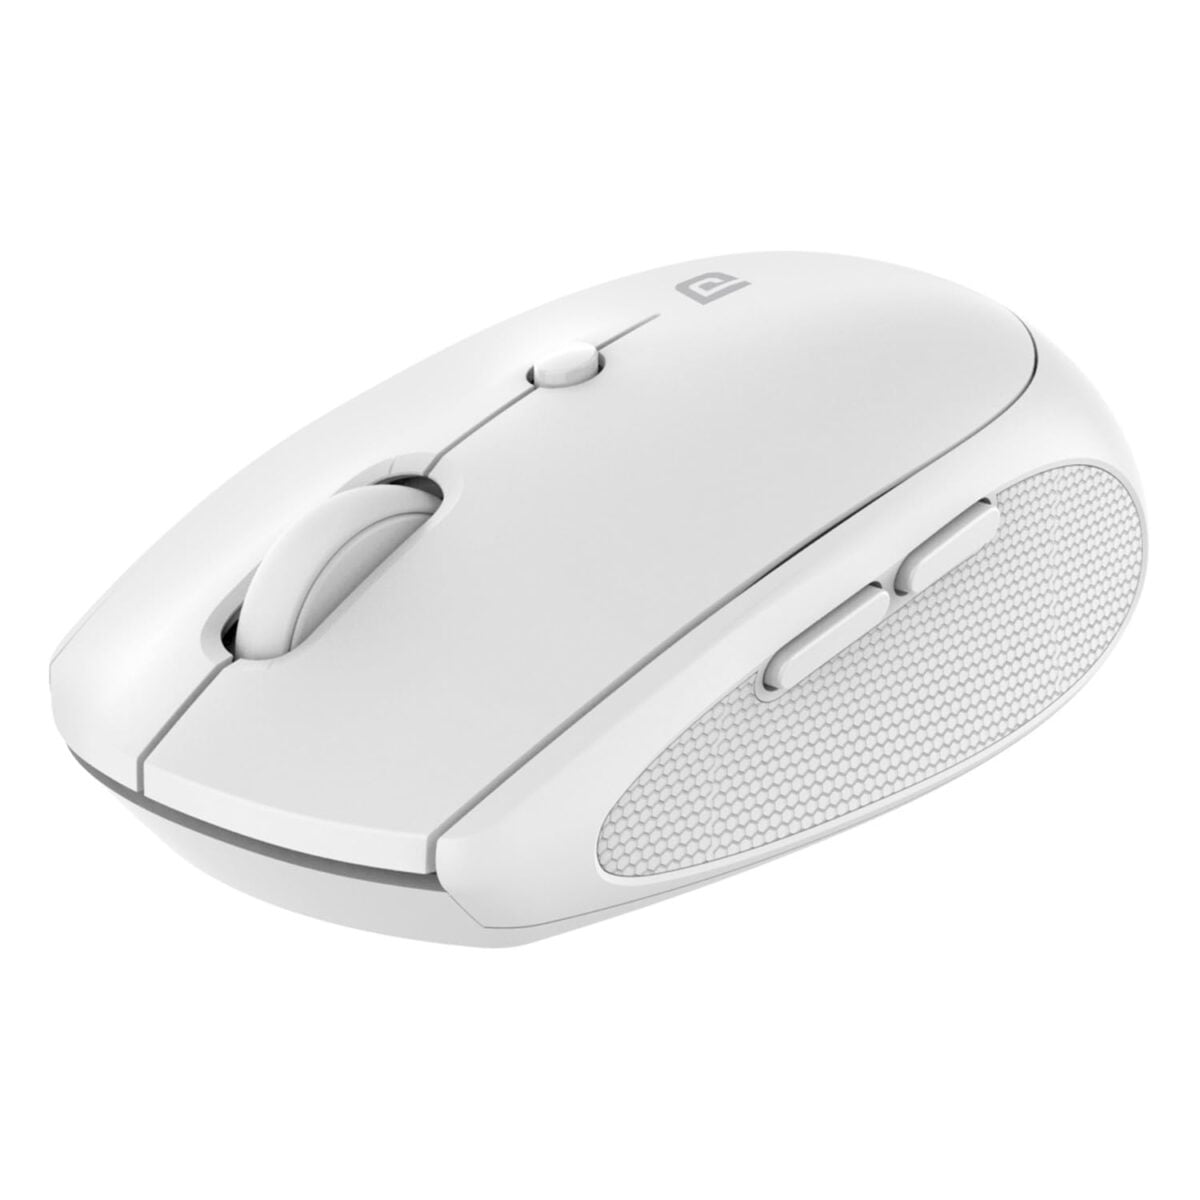 Portronics toad 30 wireless mouse